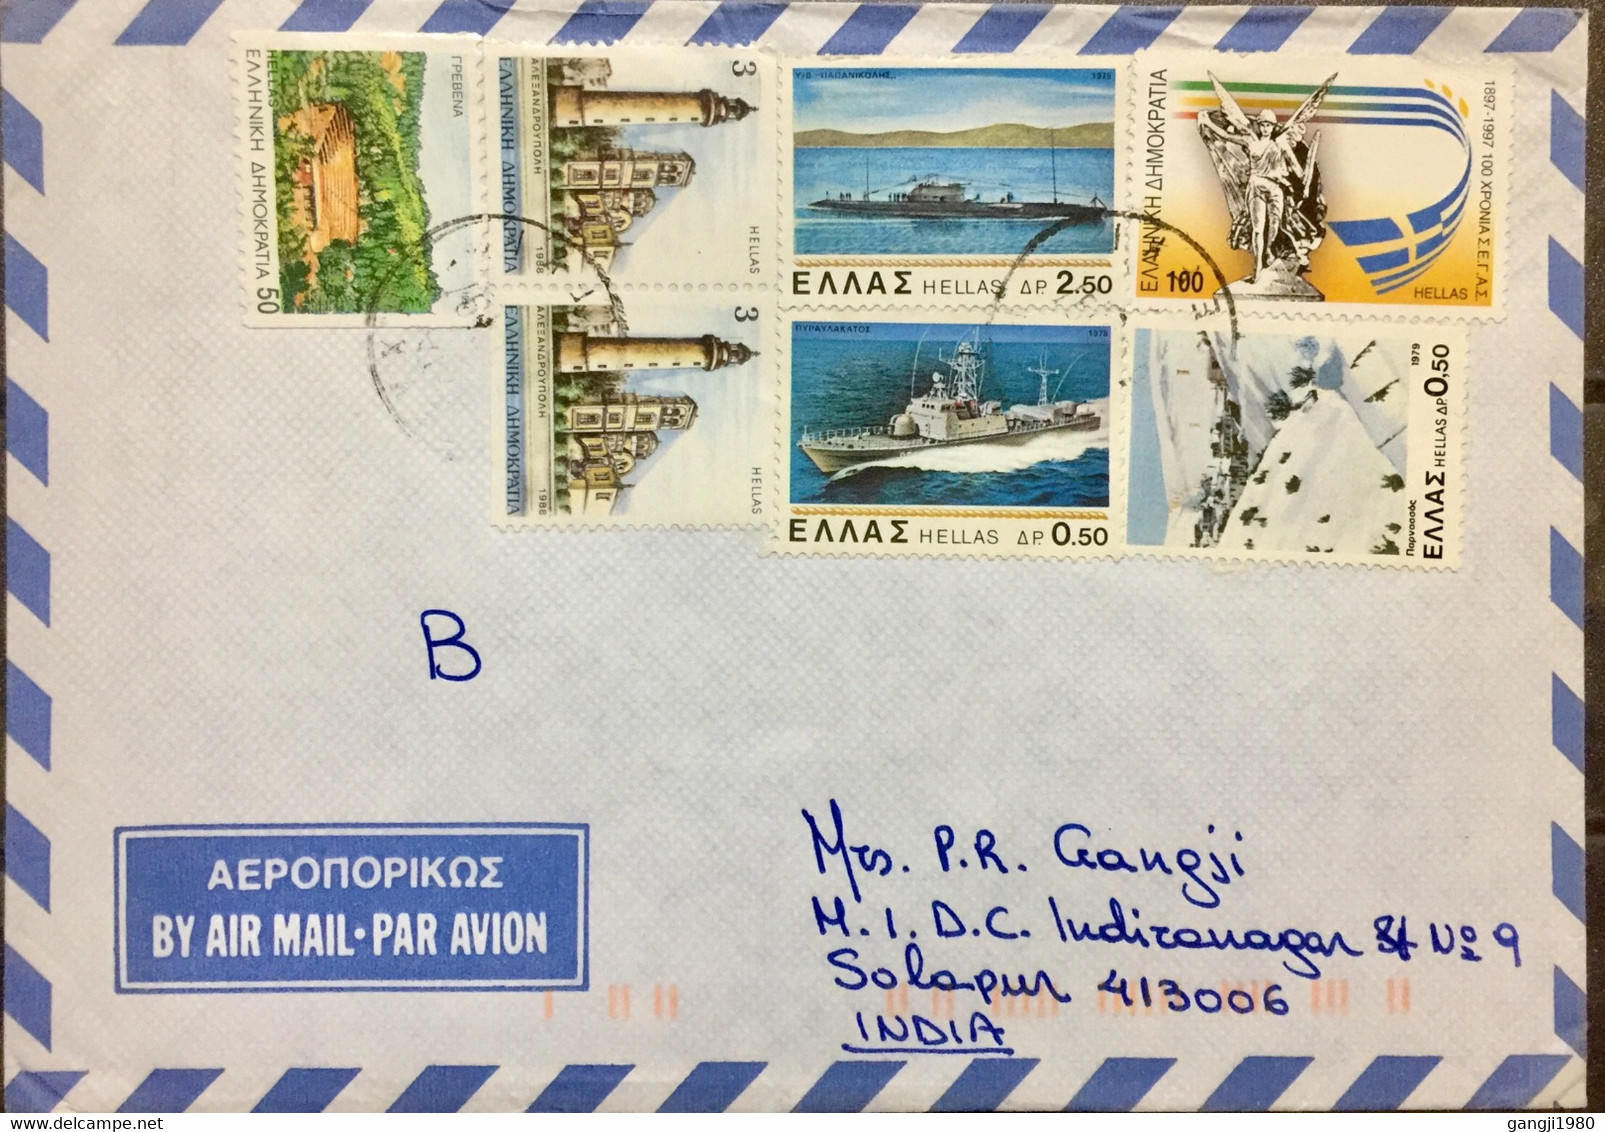 GREECE 1997, USED AIRMAIL COVER TO INDIA,DIFFERENT 7 STAMPS SHIP ,LIGHT HOUSE,FLAG,NATURE,SNOW -MOUNTAIN STATUE, BUILDIN - 1941-45 Japanisch Besetzung